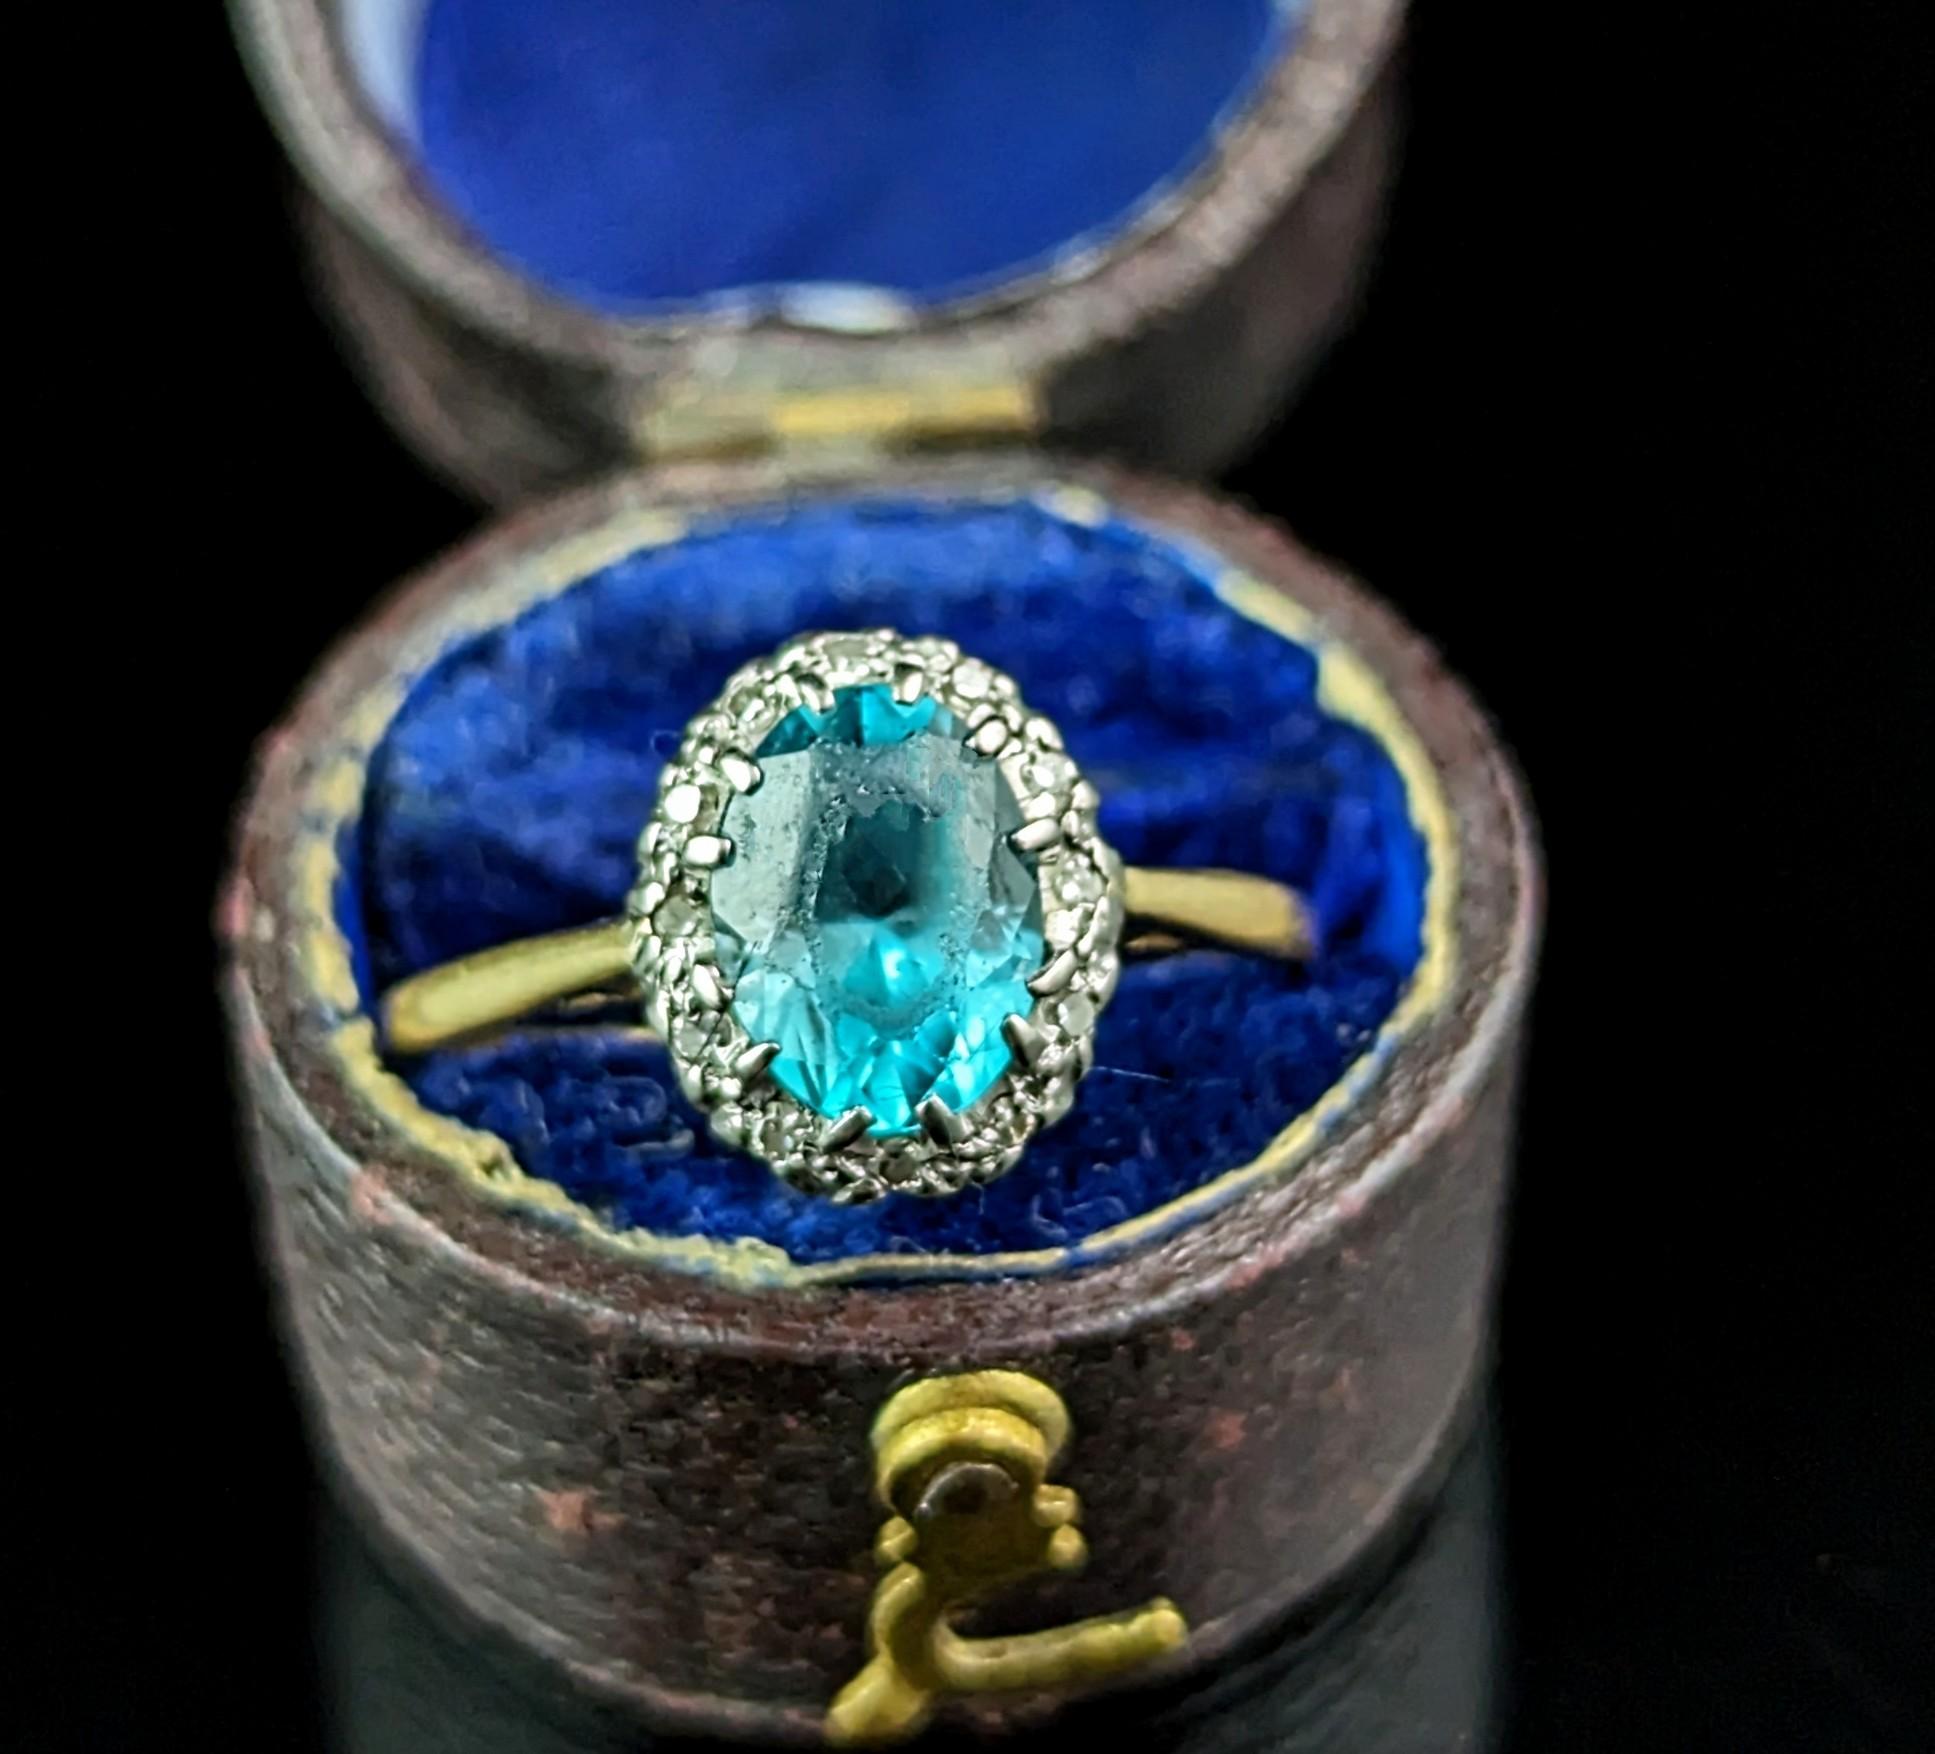 A pretty vintage Art Deco era Blue Zircon and Diamond cluster ring.

A rich 18ct yellow gold band with a vibrant blue zircon to the centre, oval cut and surrounded by a halo of small single cut diamonds in a cool silver setting to enhance the